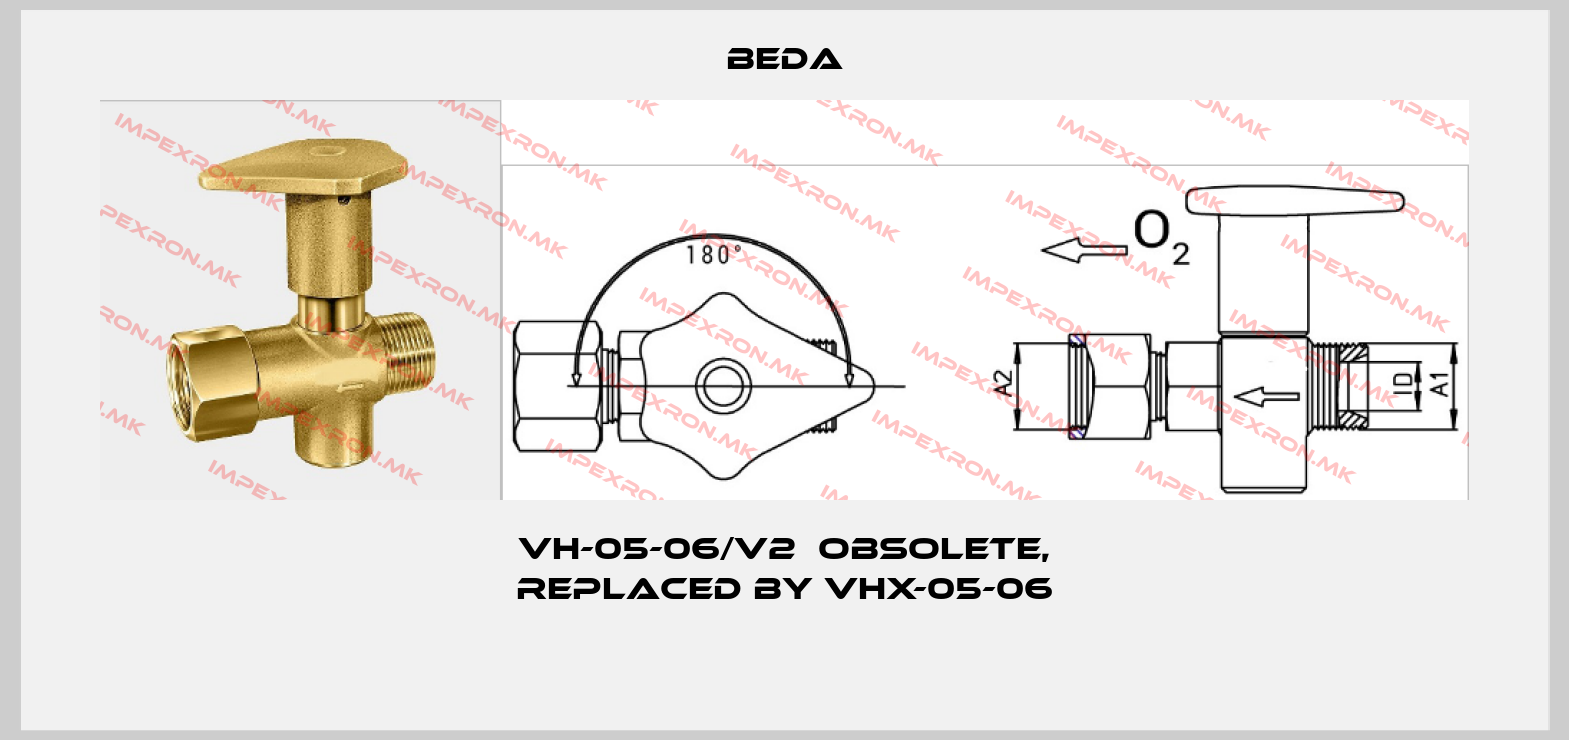 BEDA-VH-05-06/V2  obsolete, replaced by VHX-05-06 price